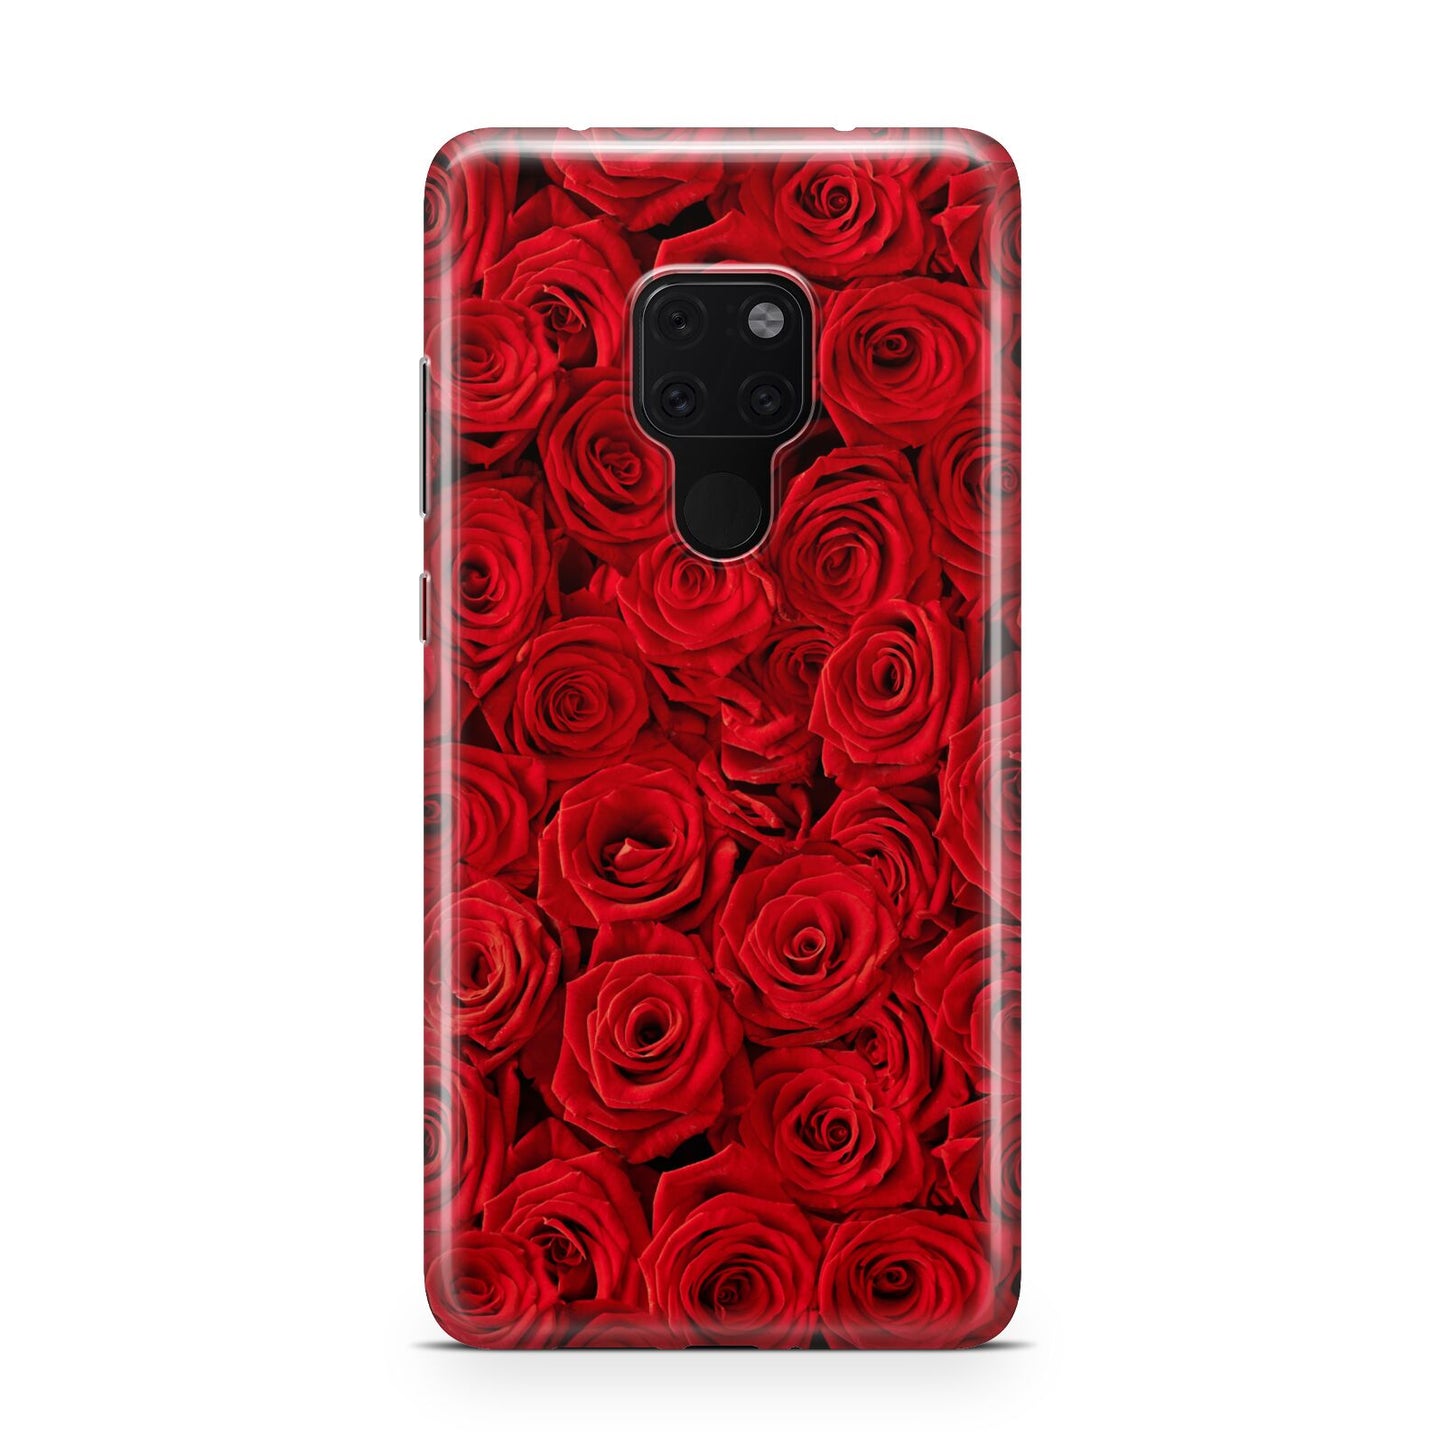 test THNG23 342 Huawei Mate 20 Phone Case